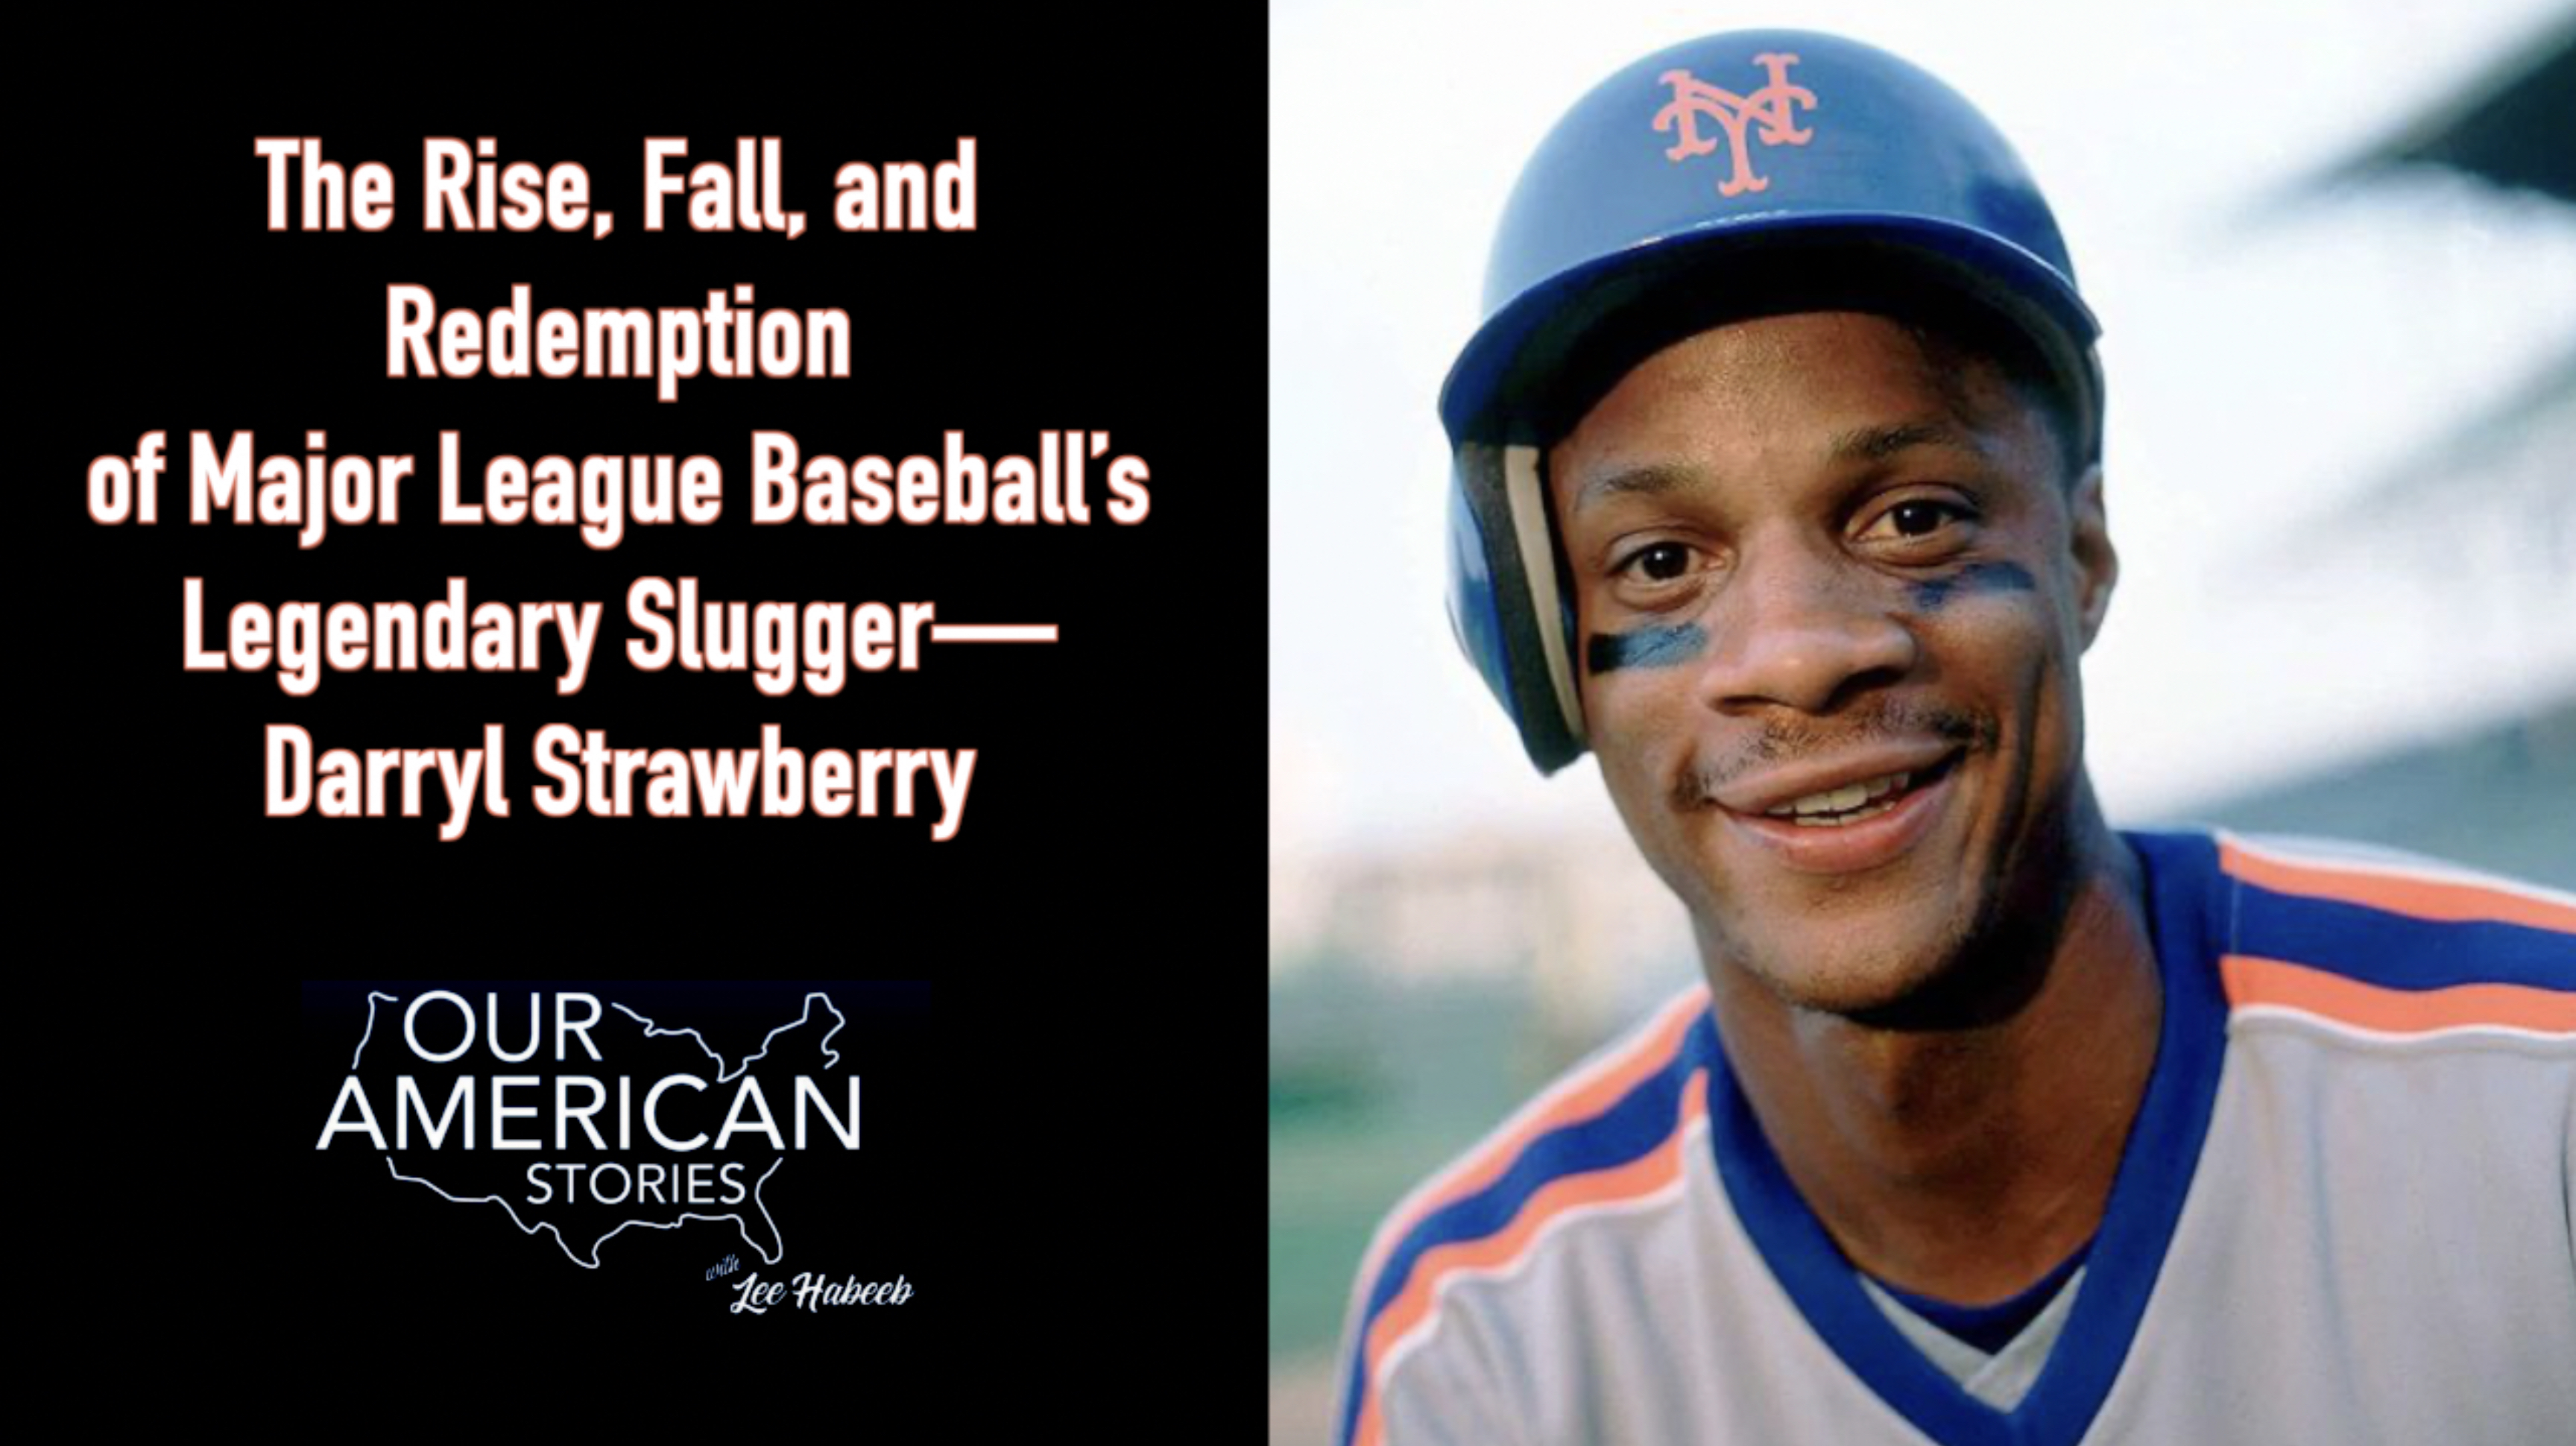 The Rise, Fall, and Redemption of Major Leauge Baseball’s Legendary Slugger—Darryl Strawberry